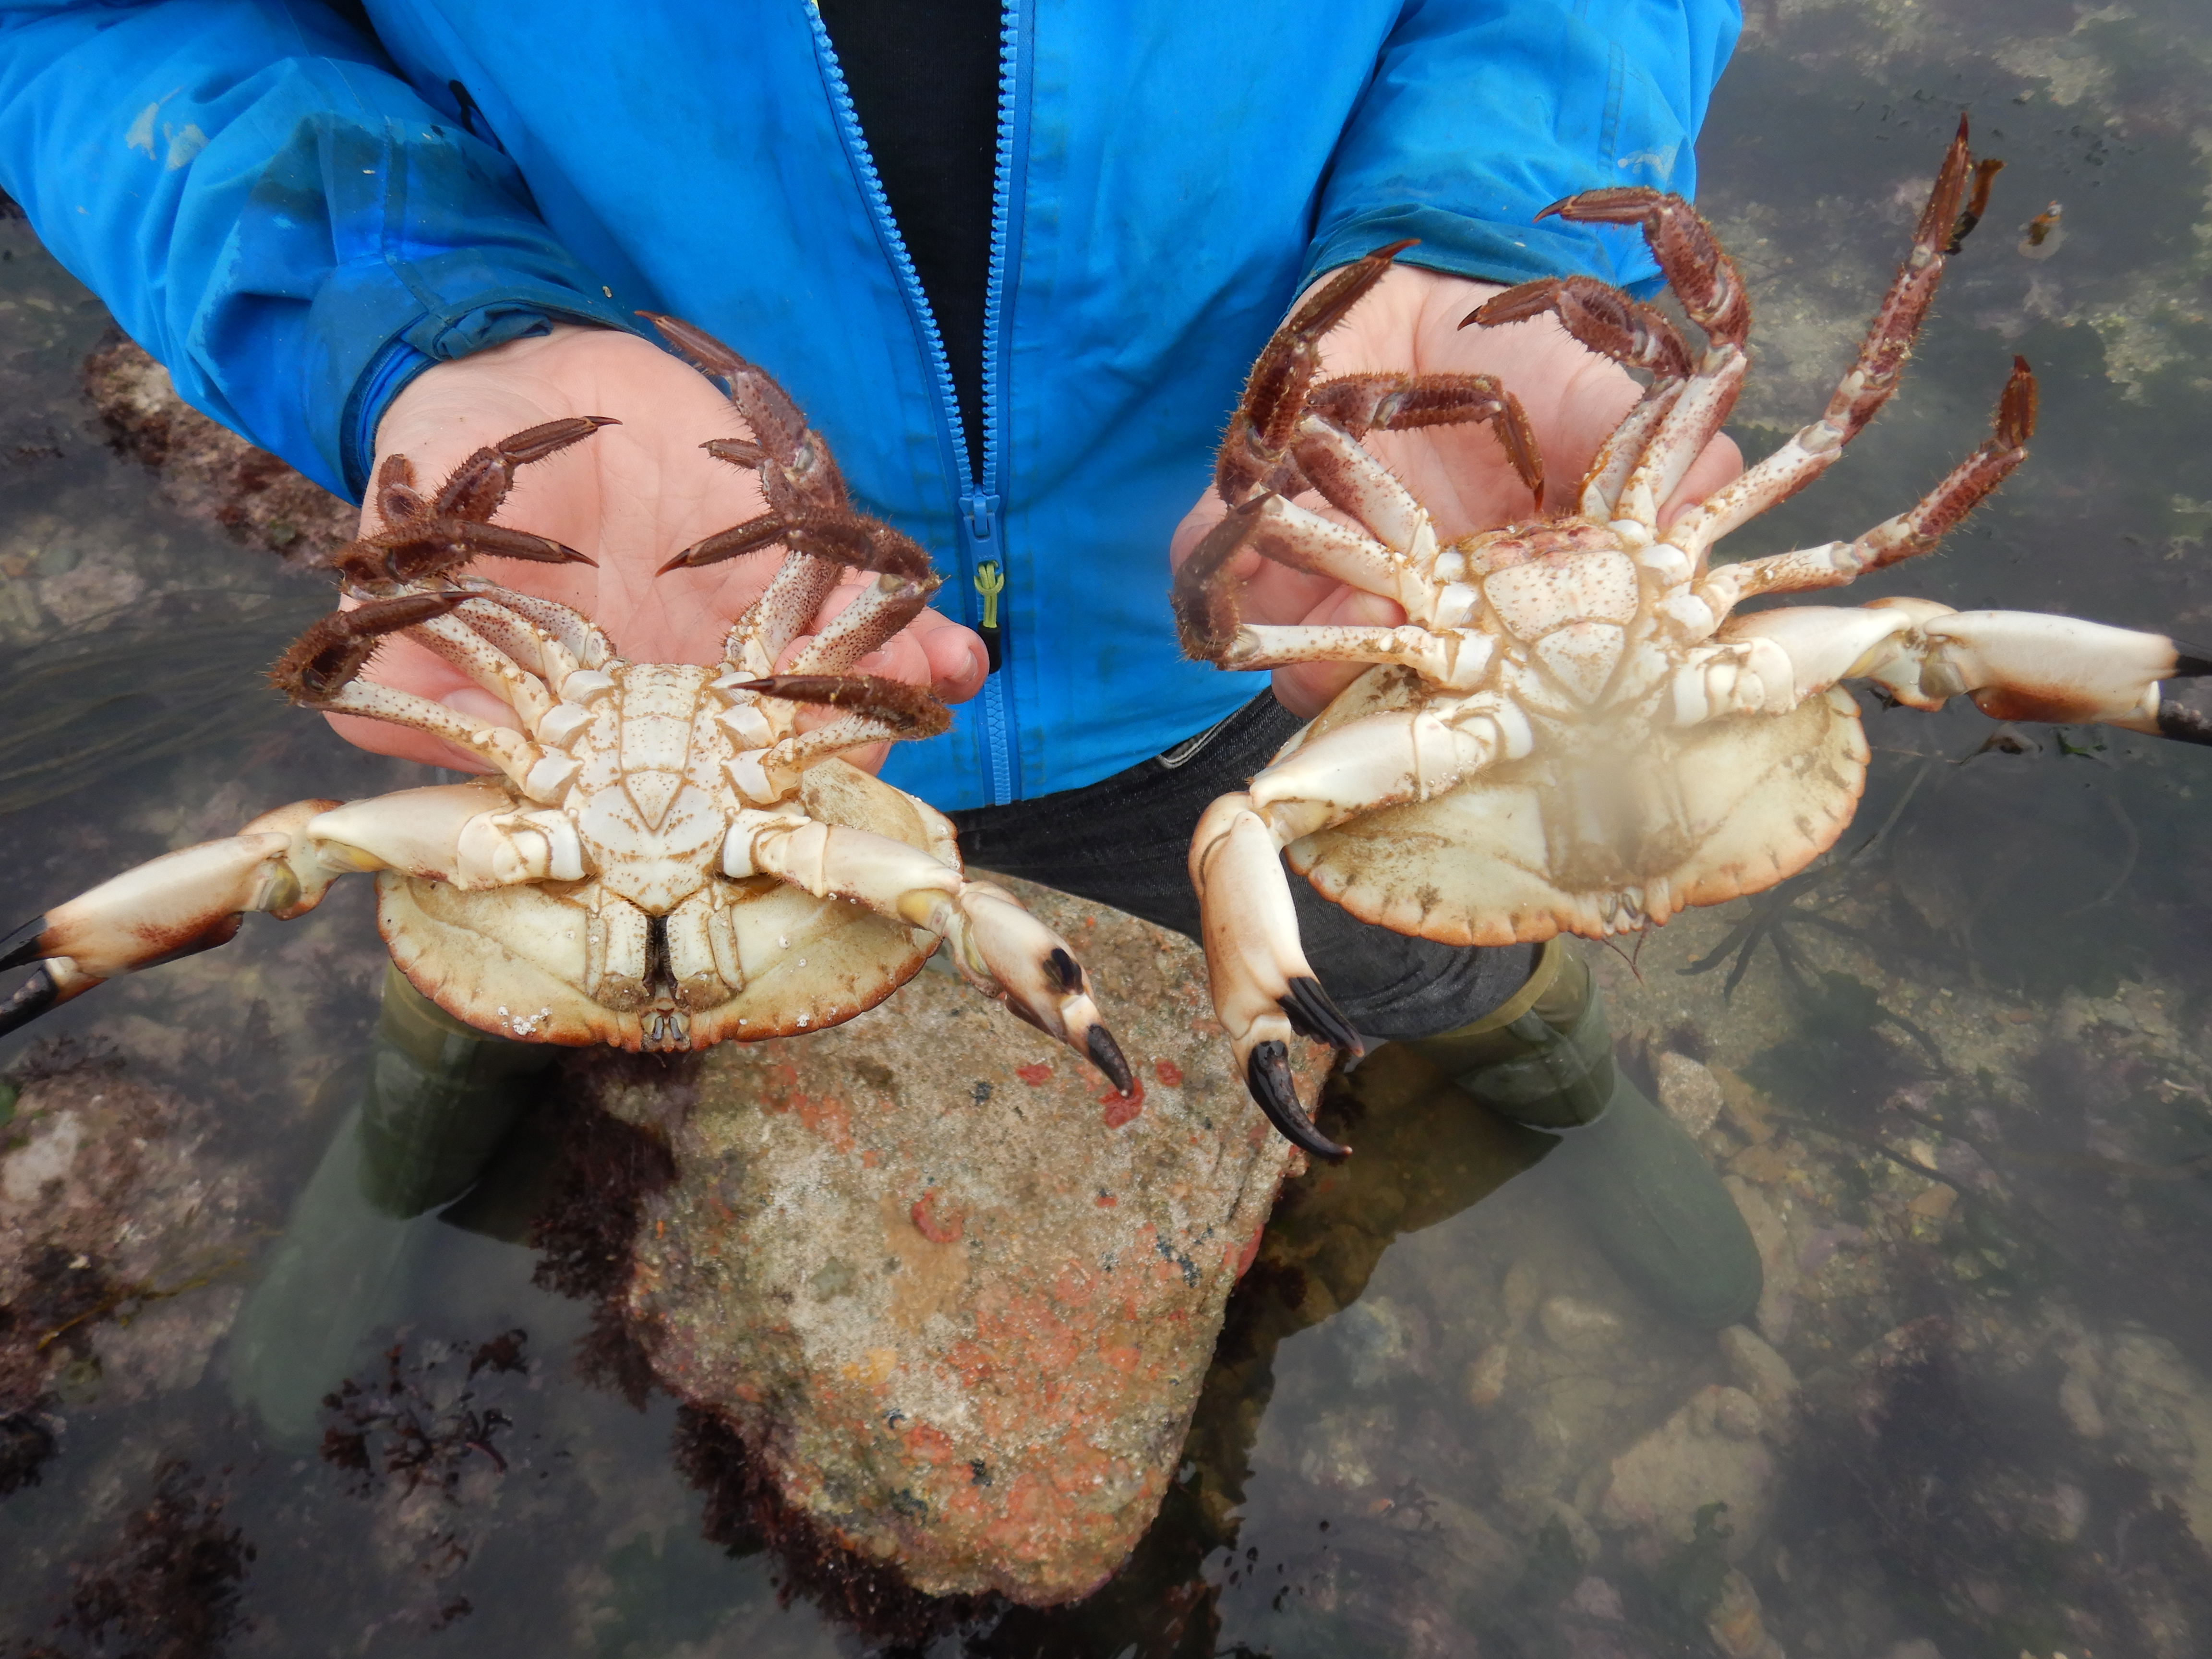 A male (left) and a female (right) Chancre Crab, recorded during a crab survey.